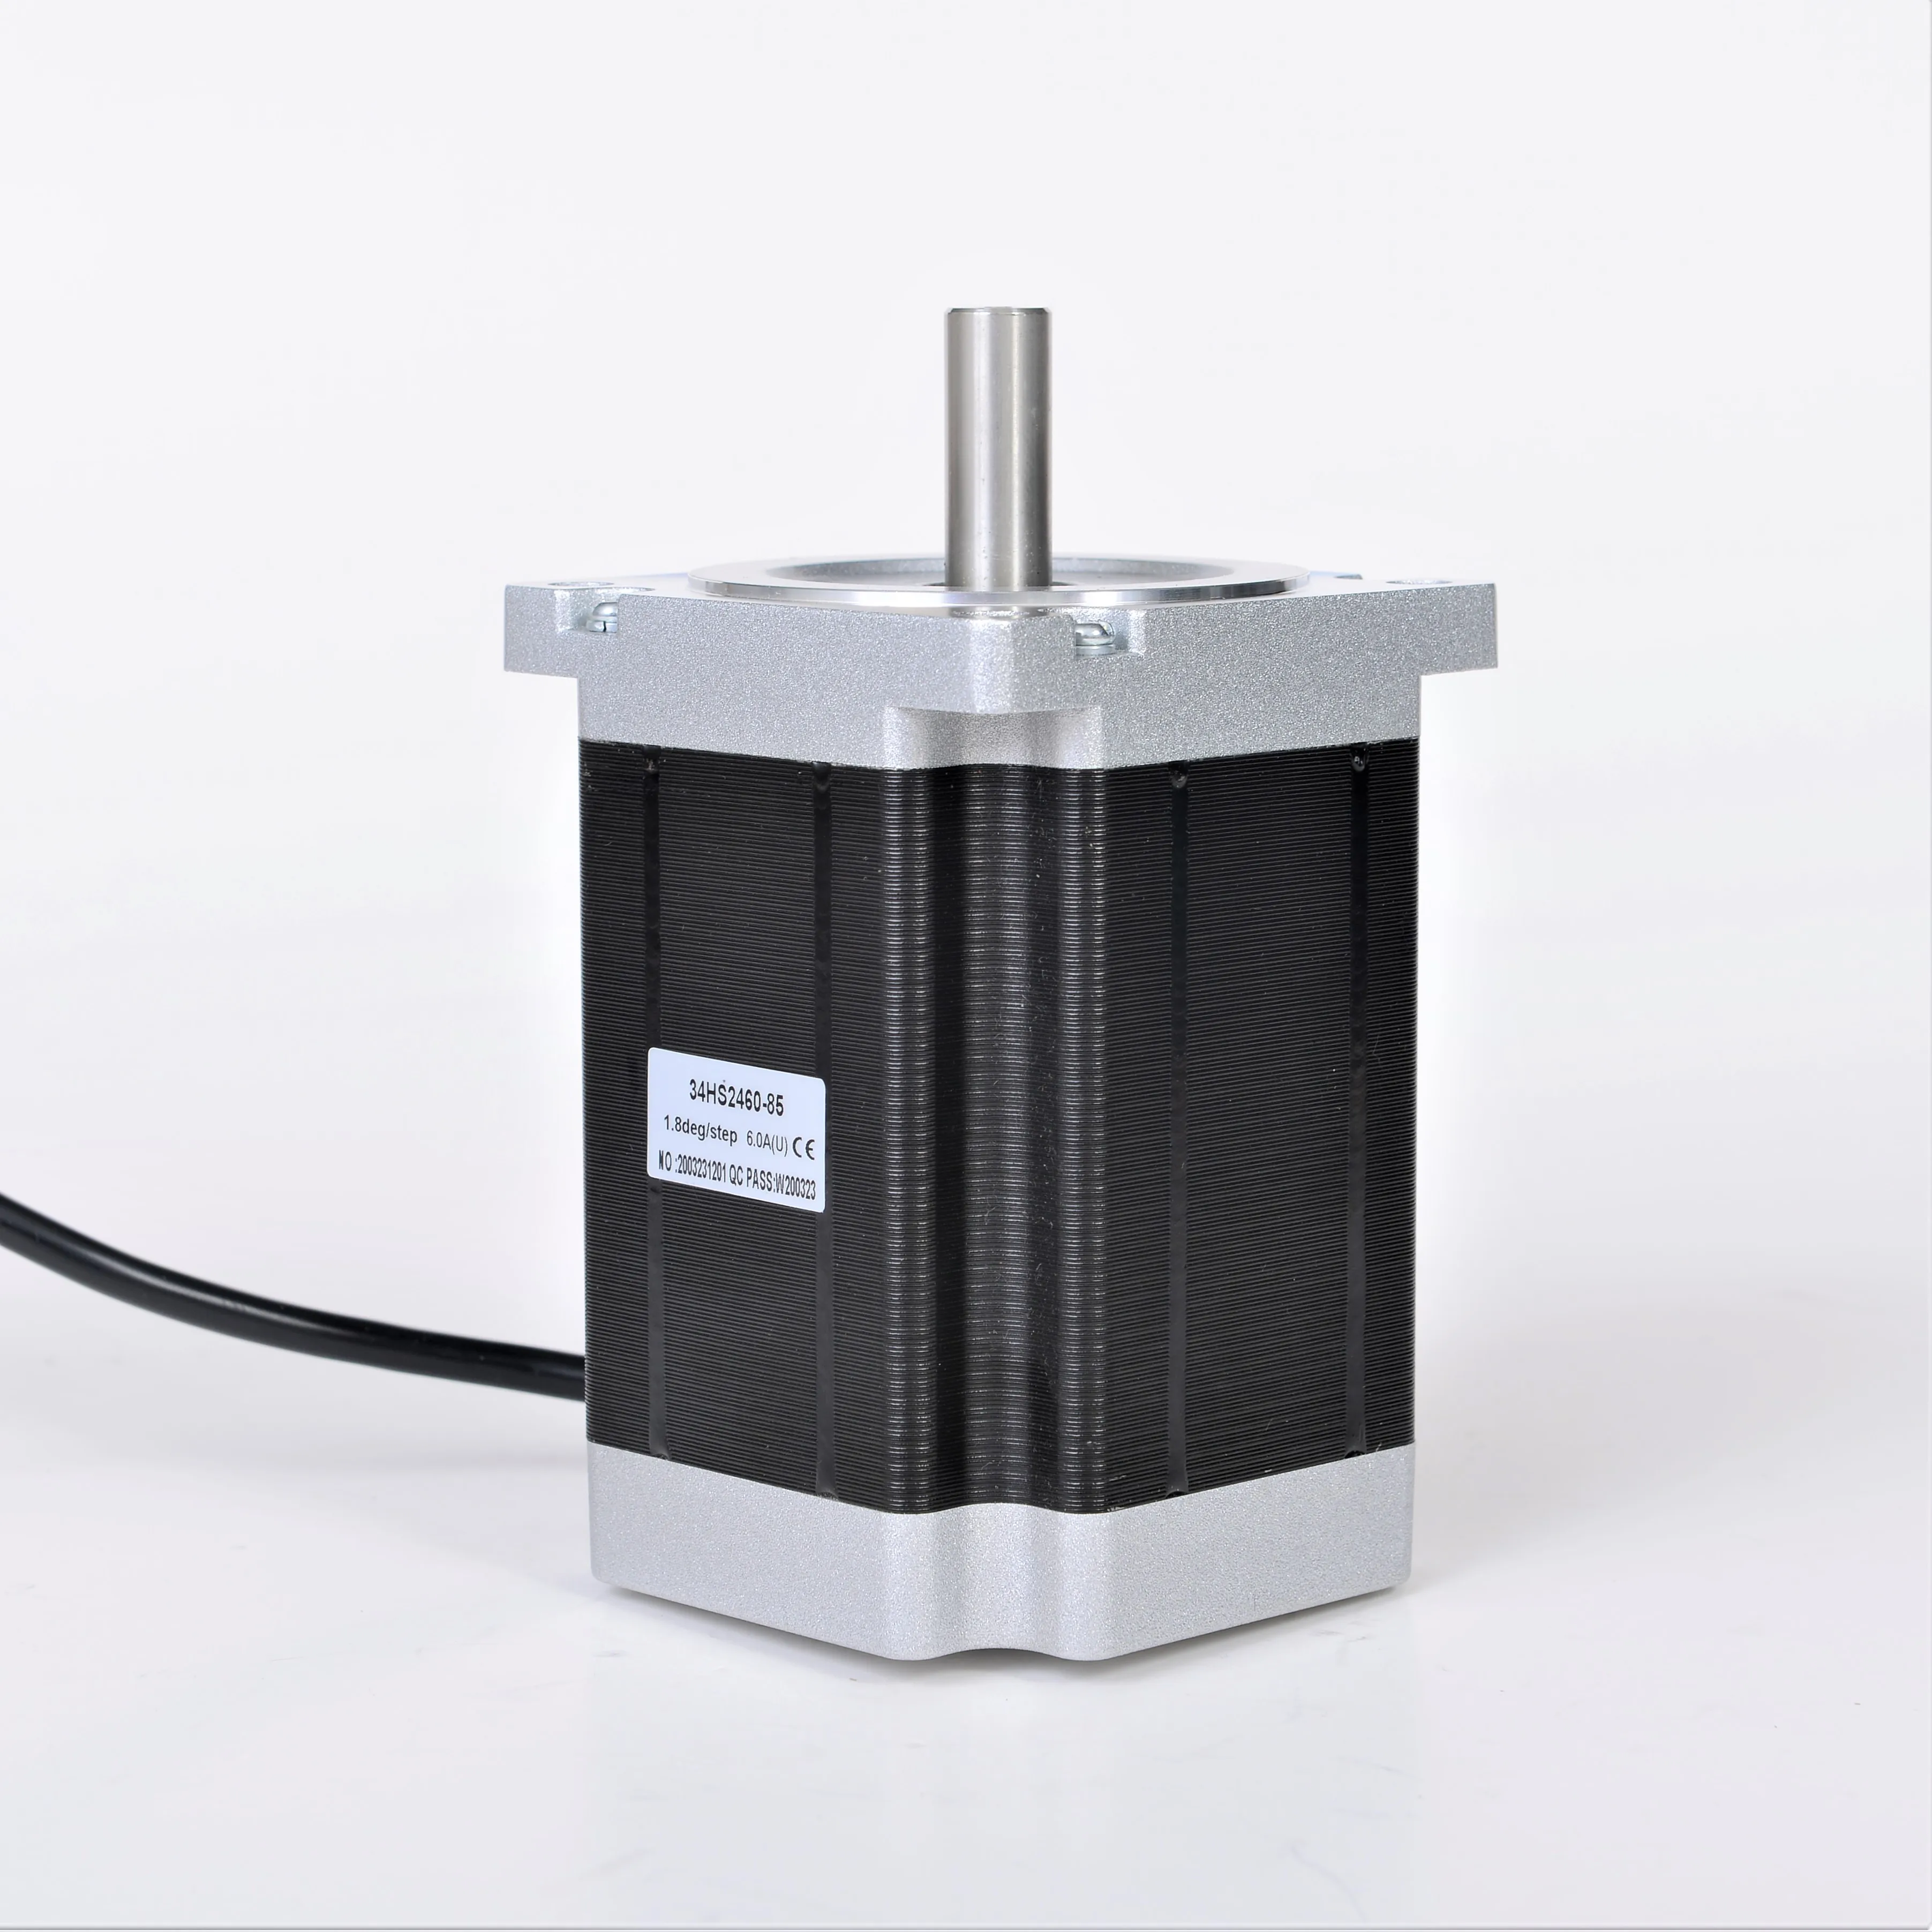 86BYGH450B-06D Stepper Motor,Large Torque 10.5NM 2900gcm²,High Precision,Stable Operation,For CNC Engraving Milling Machine